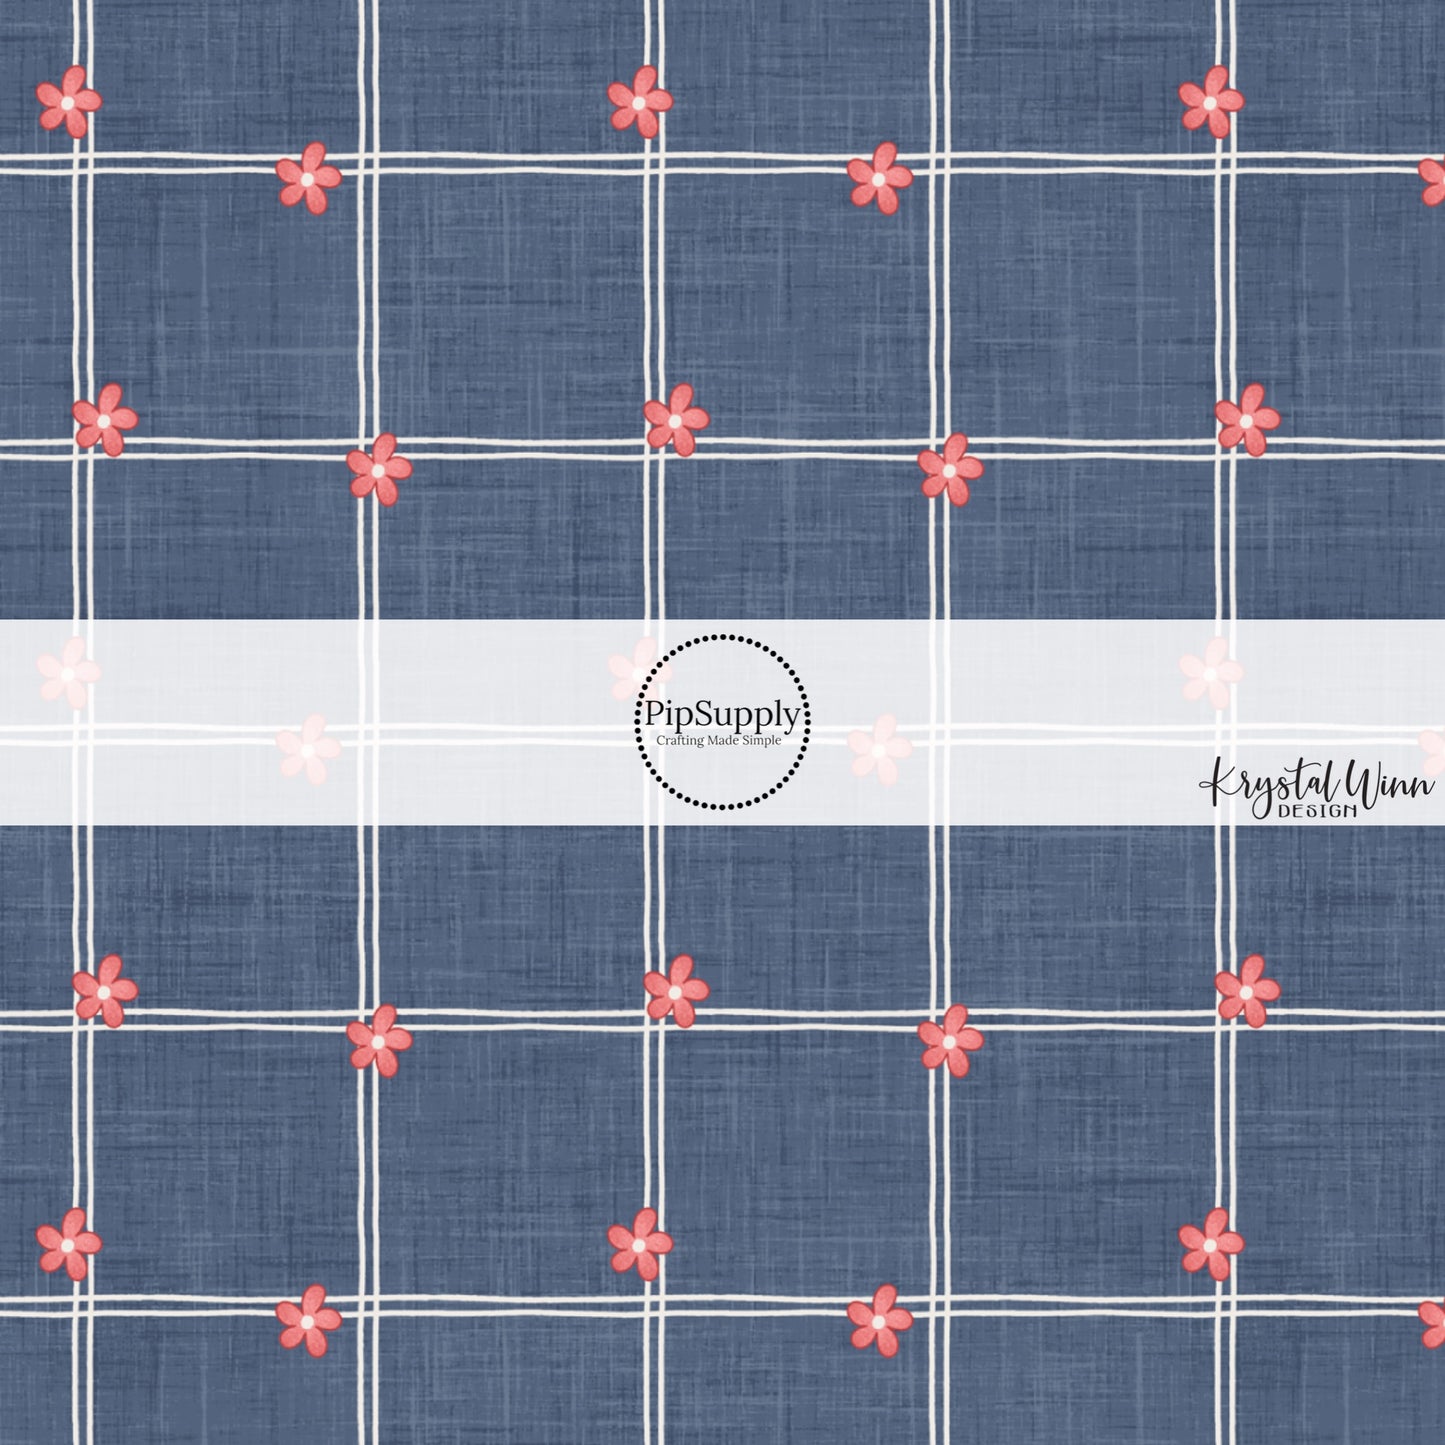 This 4th of July fabric by the yard features patriotic flowers on blue plaid. This fun patriotic themed fabric can be used for all your sewing and crafting needs!